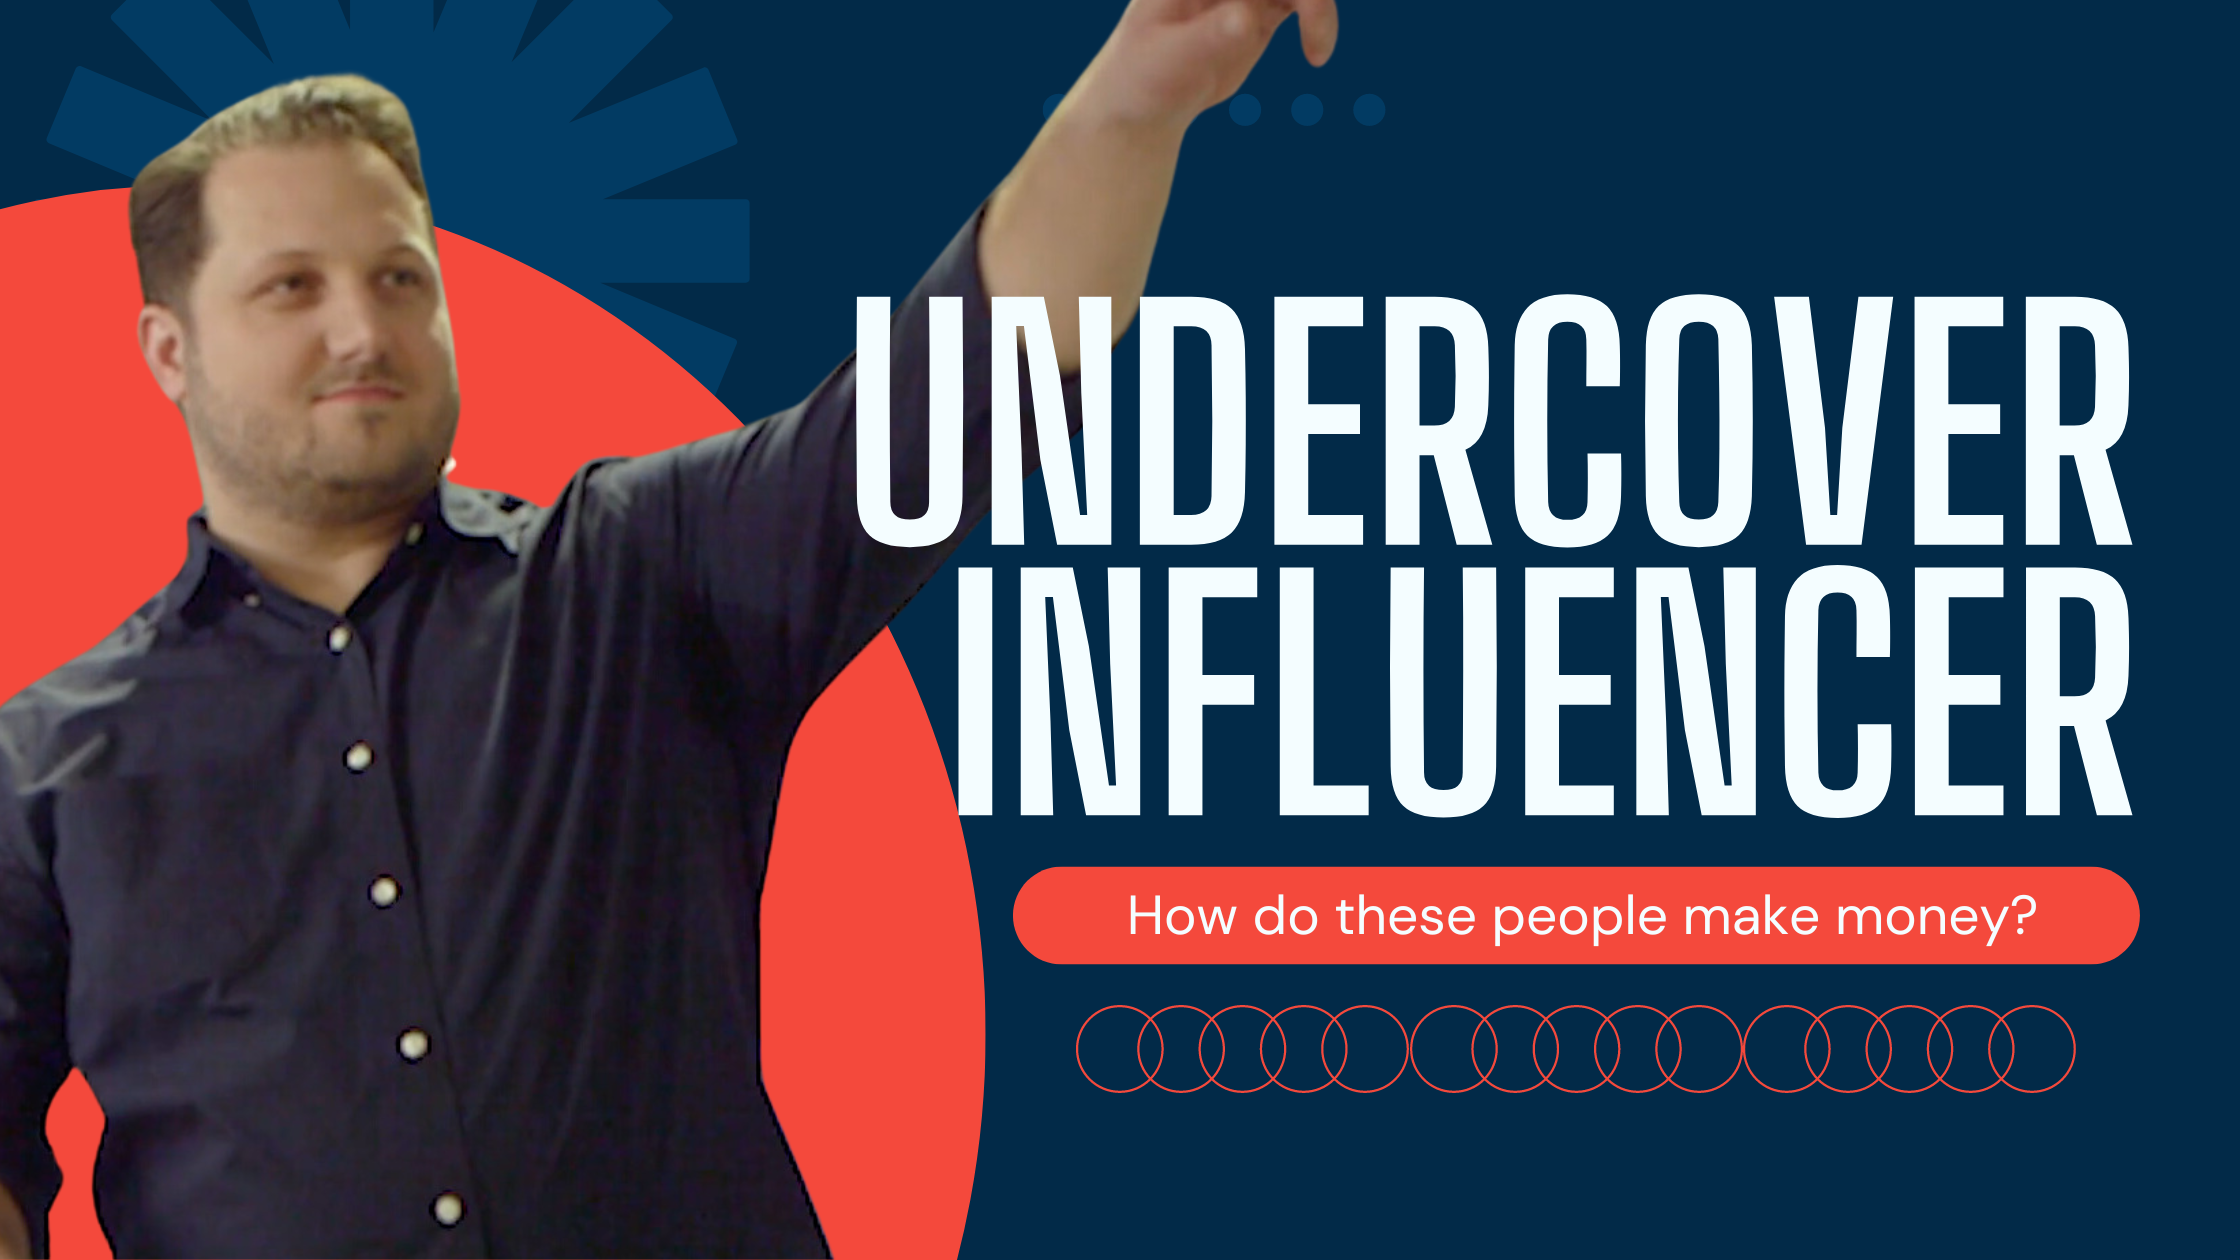 I’m going undercover as an influencer / affiliate marketer